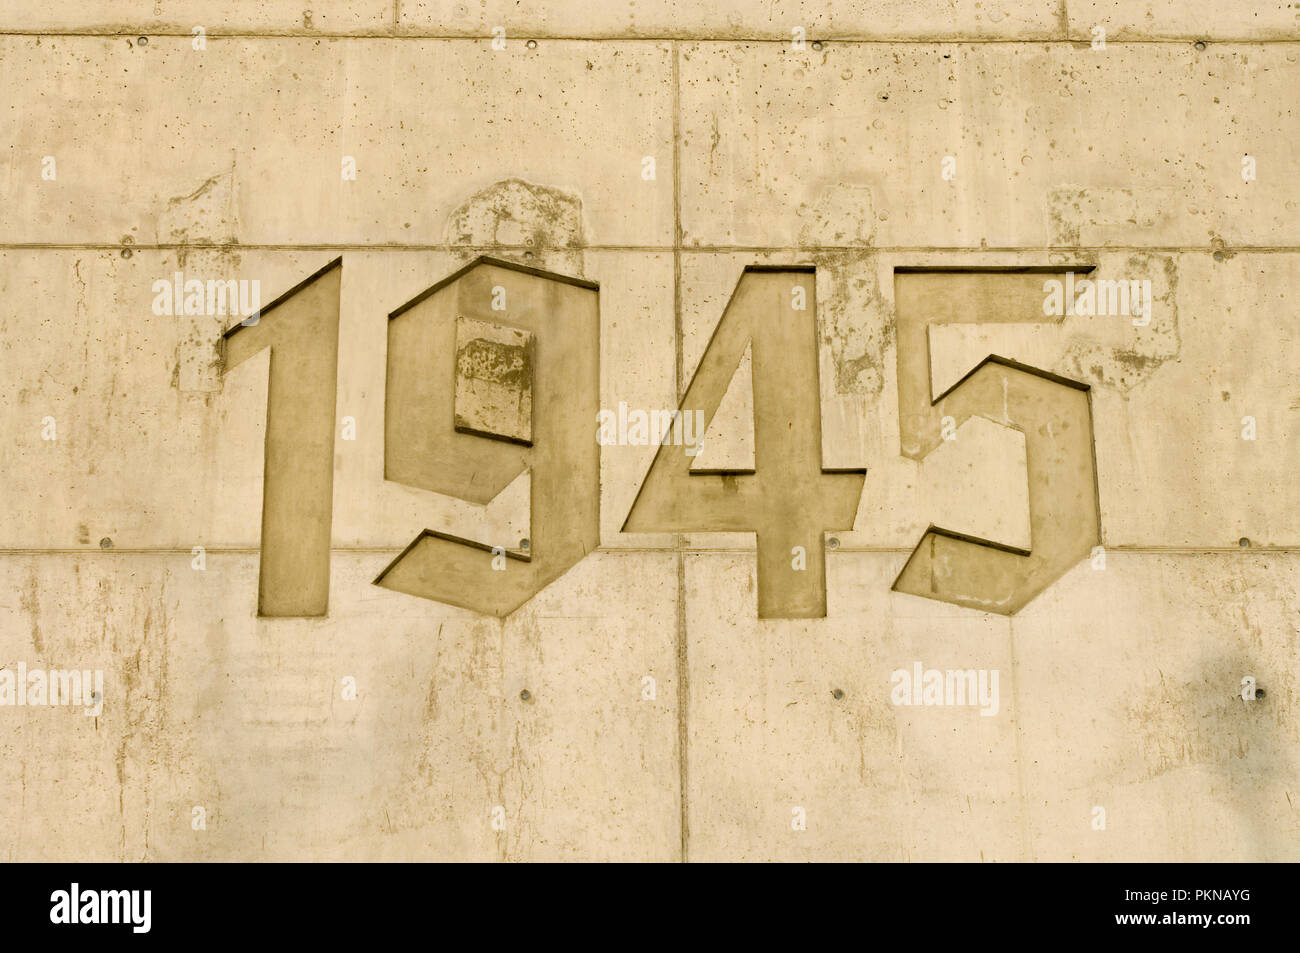 1945 carved into the wall of the Holocaust memorial at Radegast railway station museum in Lodz, Poland. During the Second World War 200000 Jews were s Stock Photo